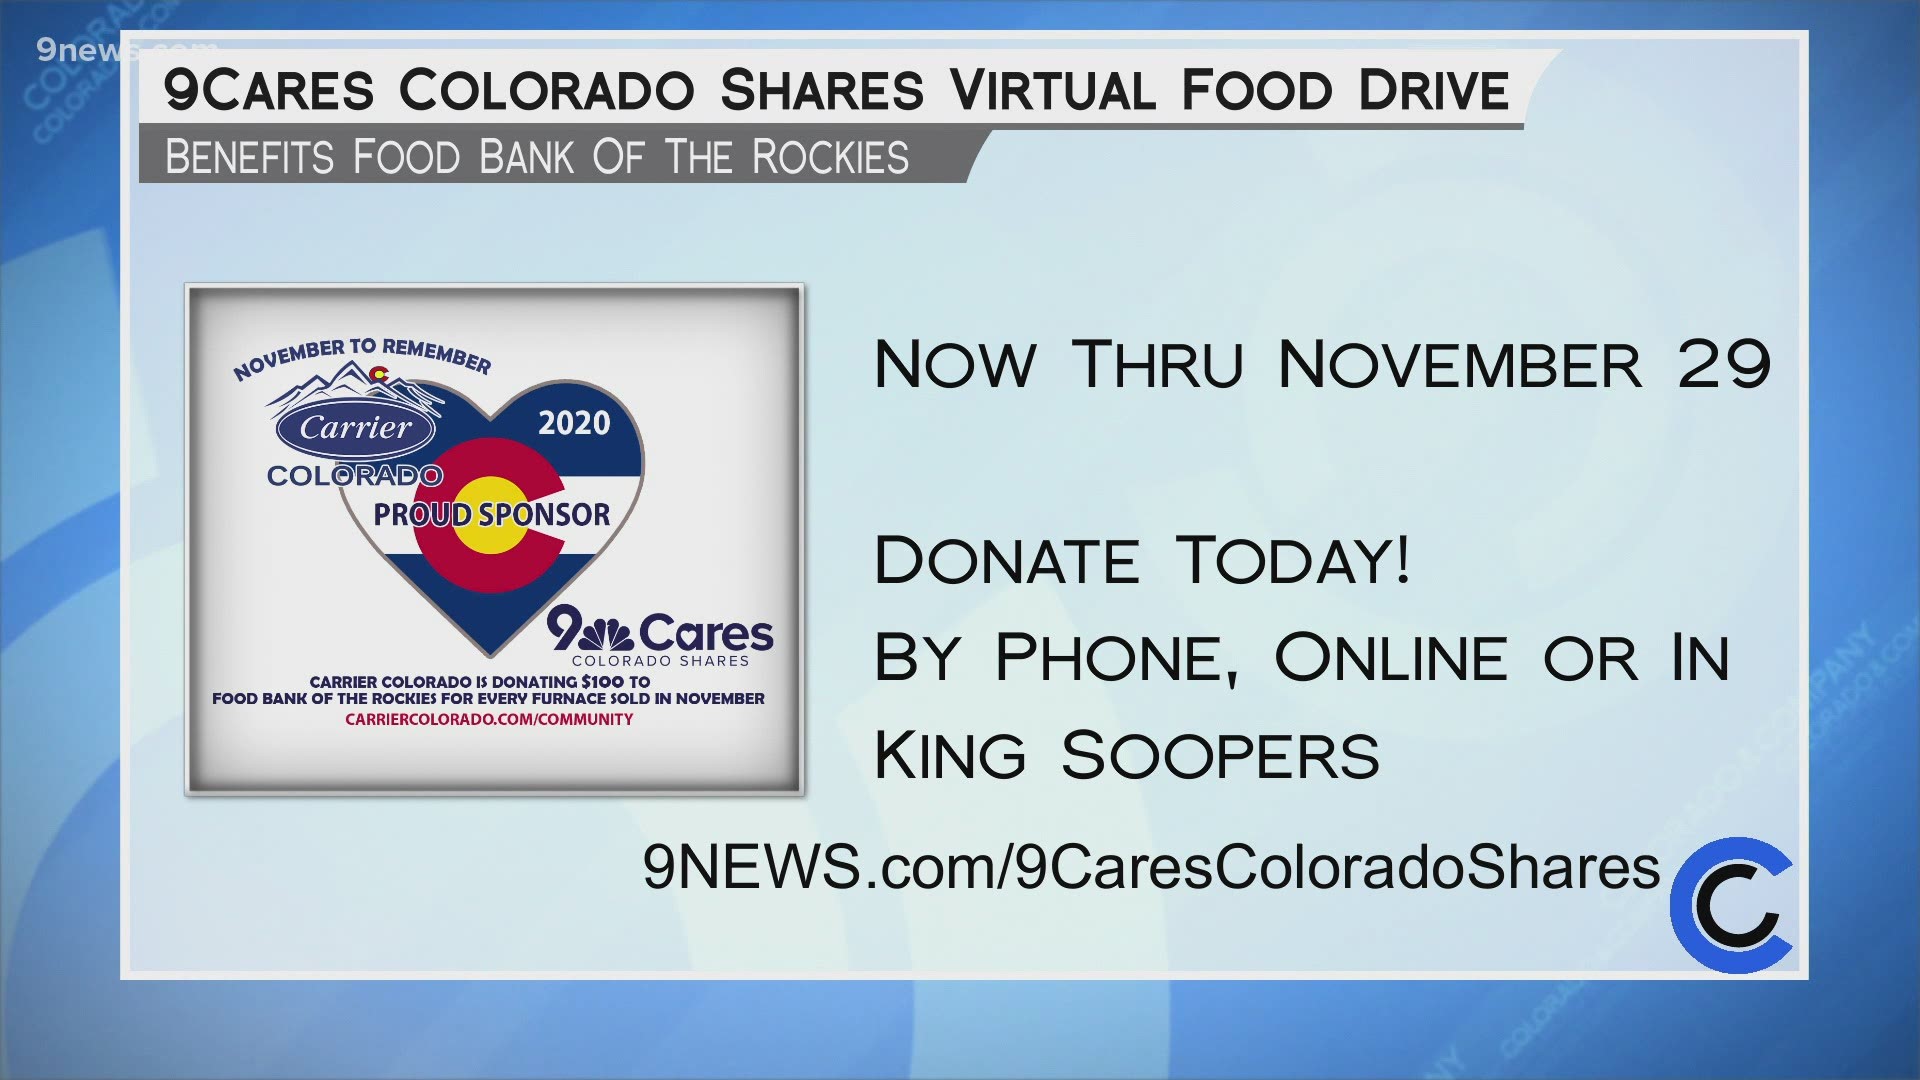 You can give from your phone! Take a pic of the QR Code on screen. You can also donate at King Soopers or at FoodBankRockies.com, or 9News.com/9CaresColoradoShares.